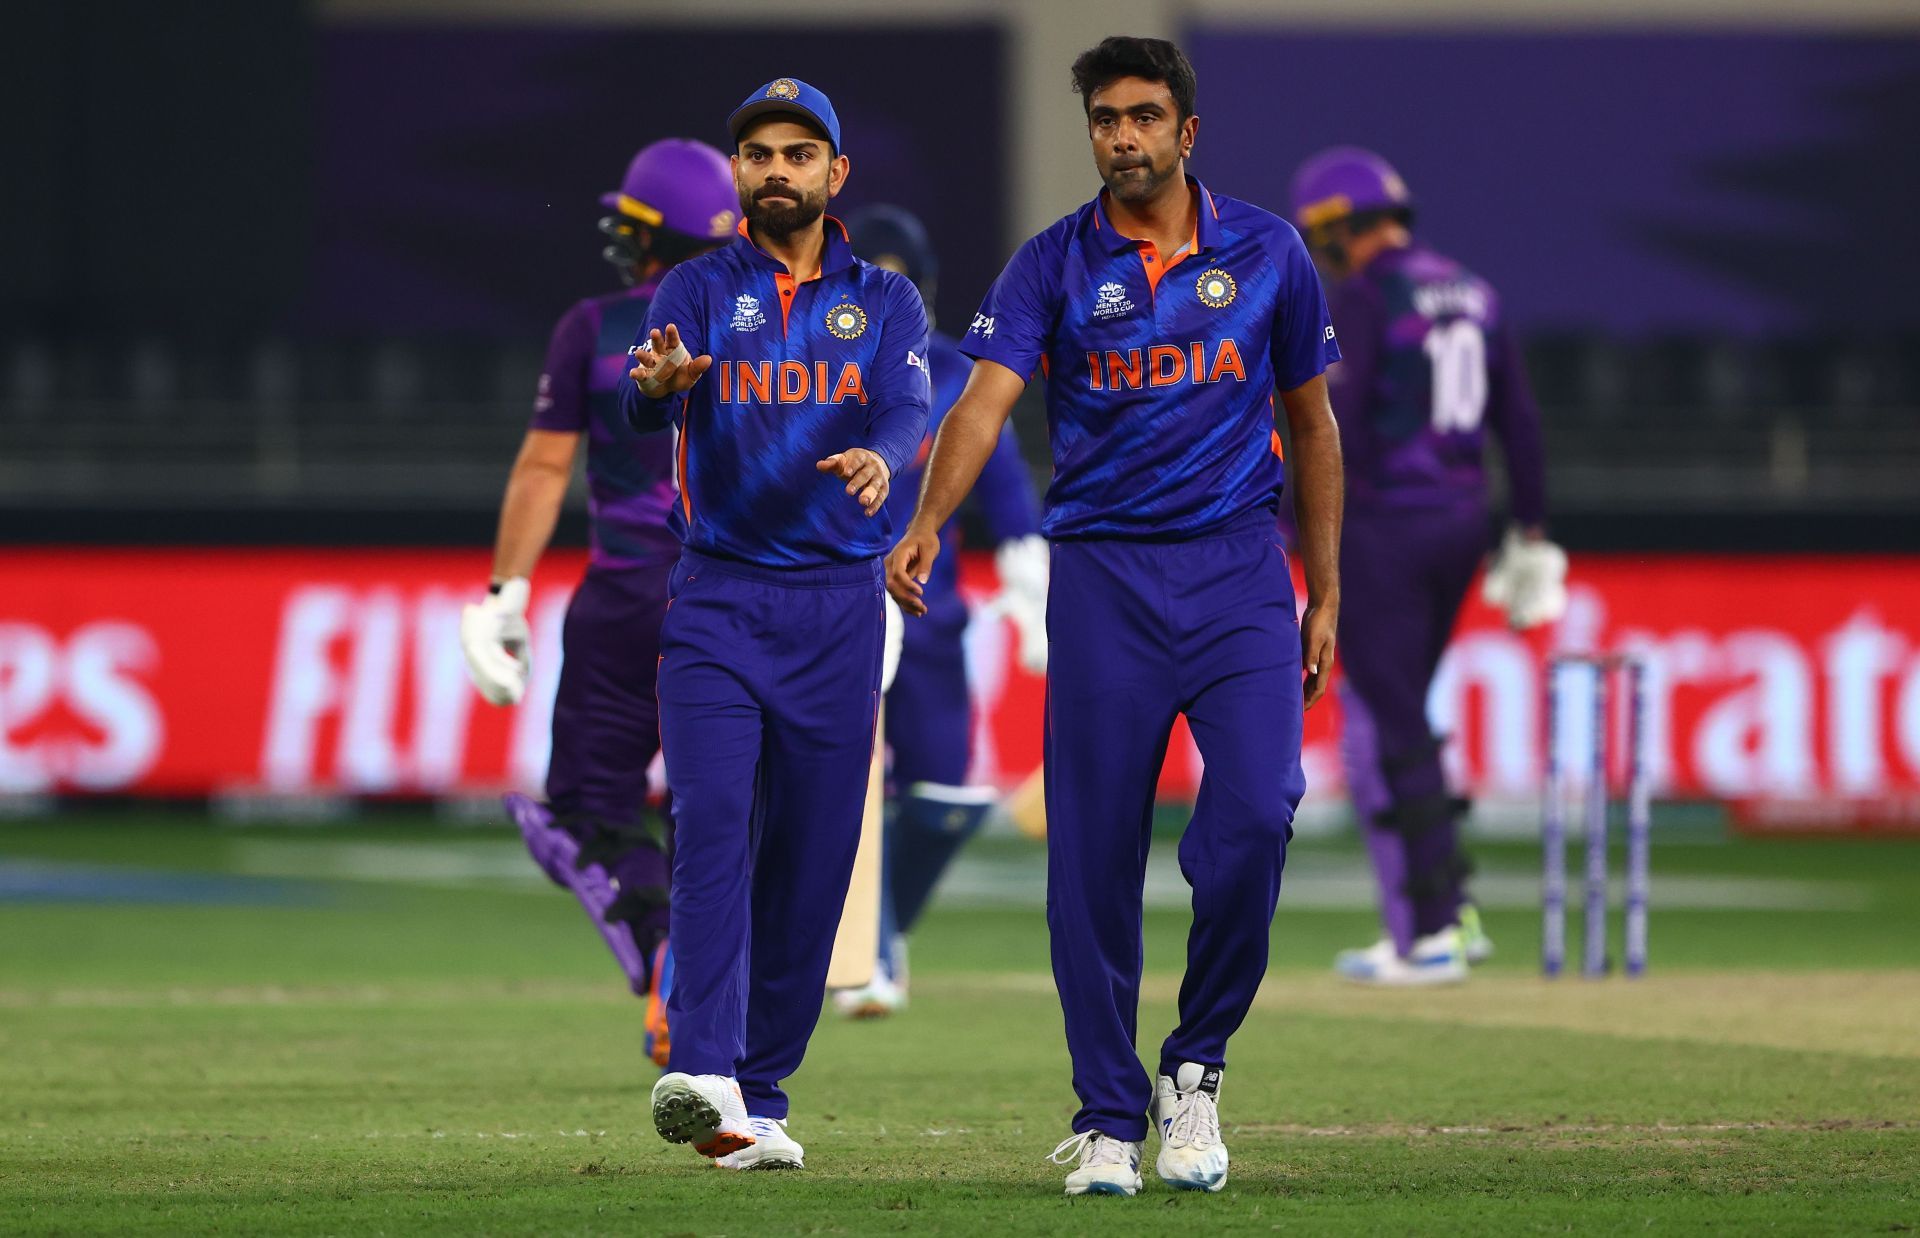 Ravichandran Ashwin took six wickets for India in ICC T20 World Cup 2021